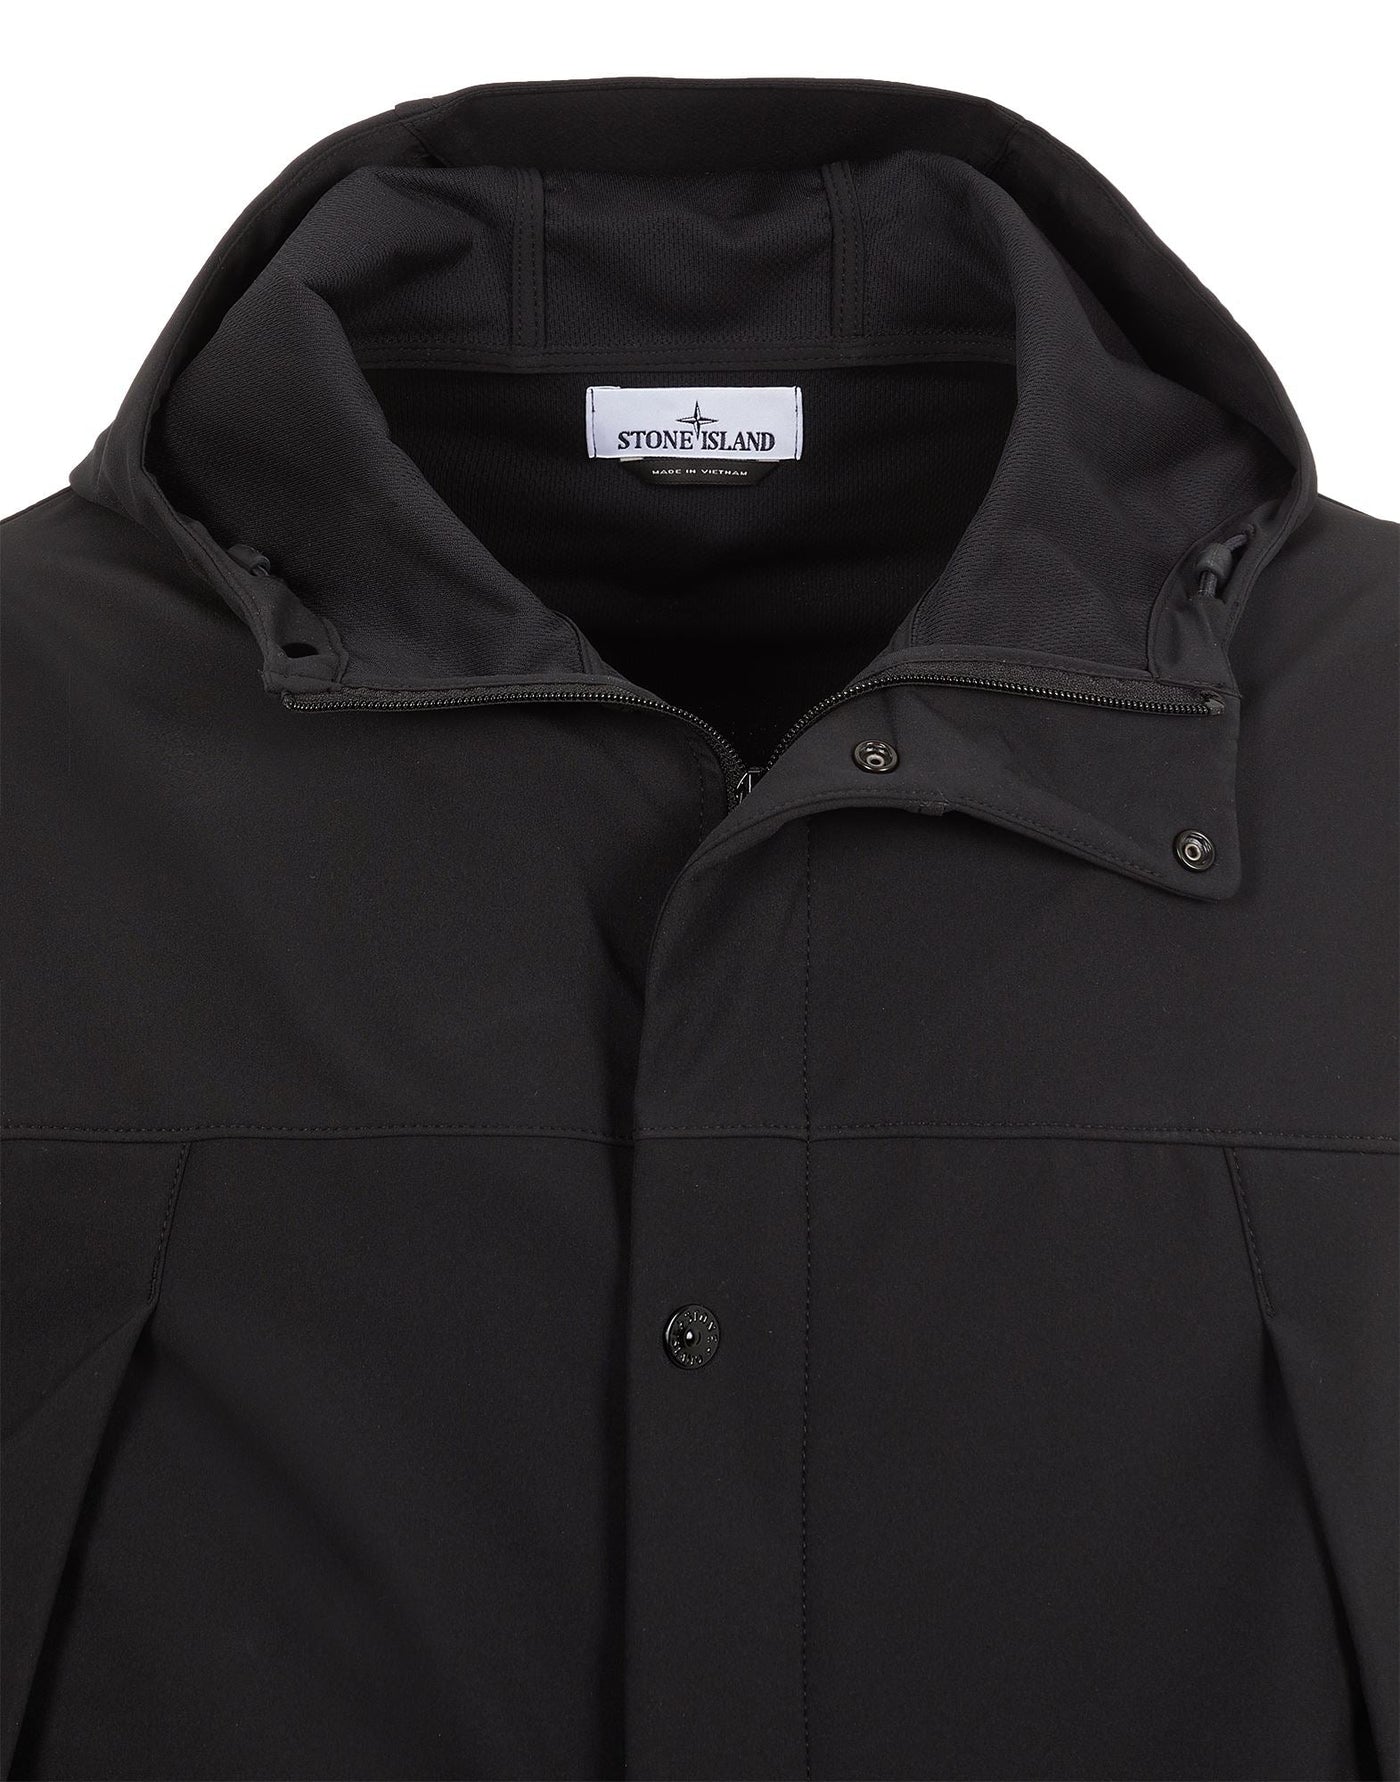 Stone Island - Veste 40227 LIGHT SOFT SHELL-R_E.DYE® TECHNOLOGY IN RECYCLED POLYESTER - Lothaire